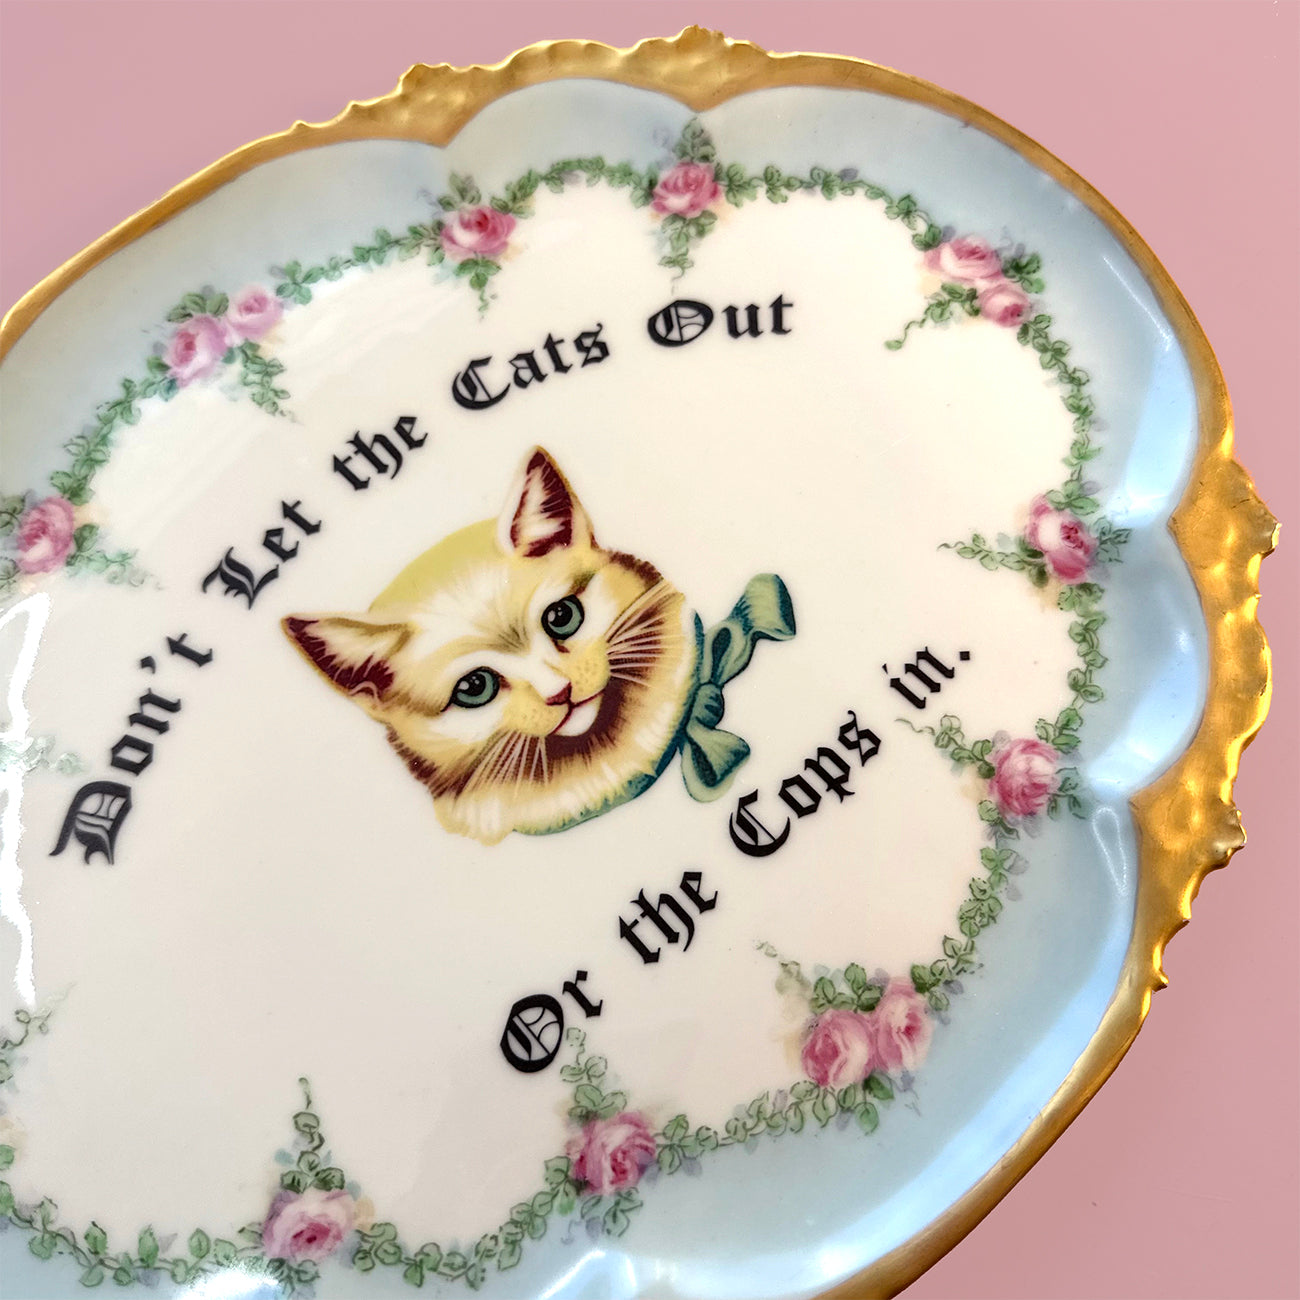 Antique Art Platter - Cat platter - "Don't let the Cats Out of the Cops in."